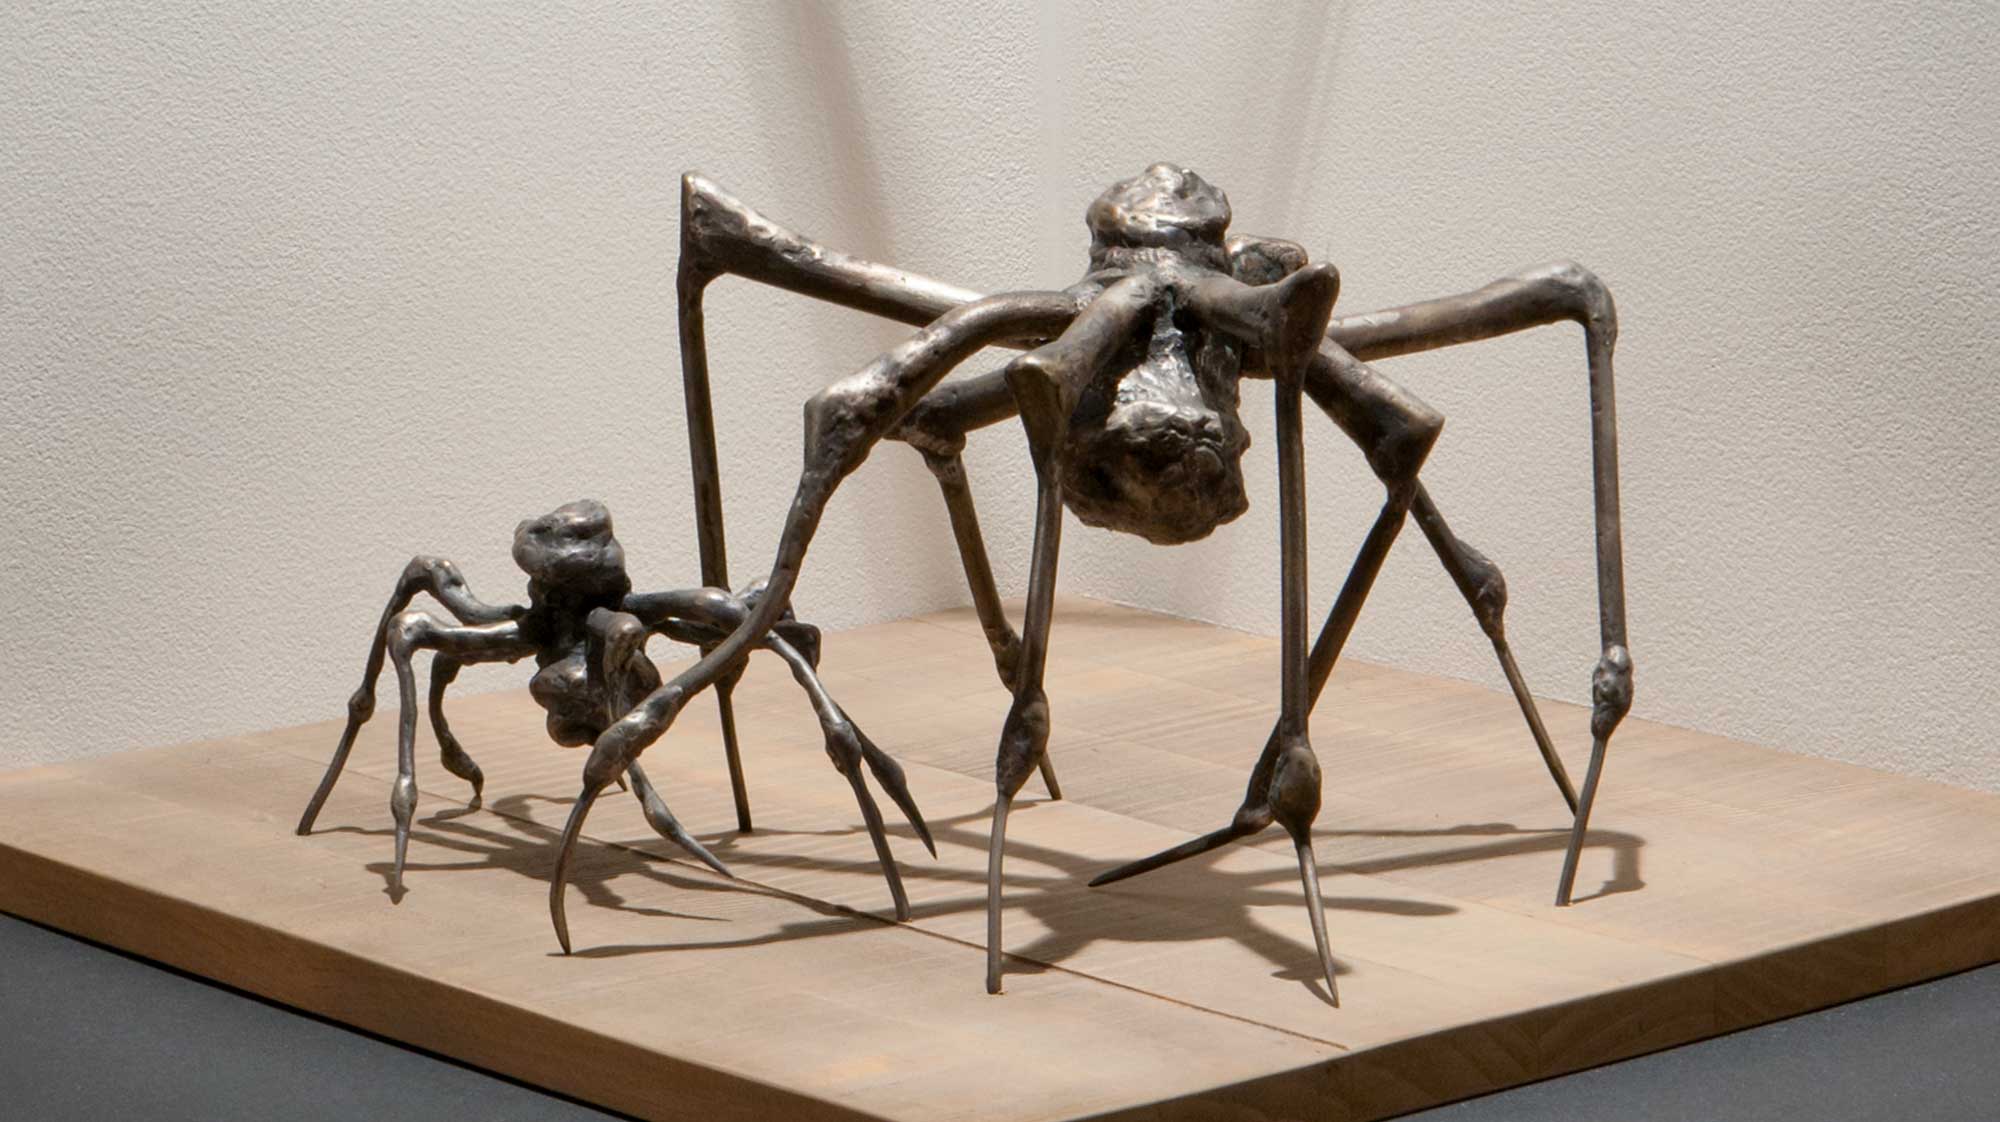 Who is Louise Bourgeois?